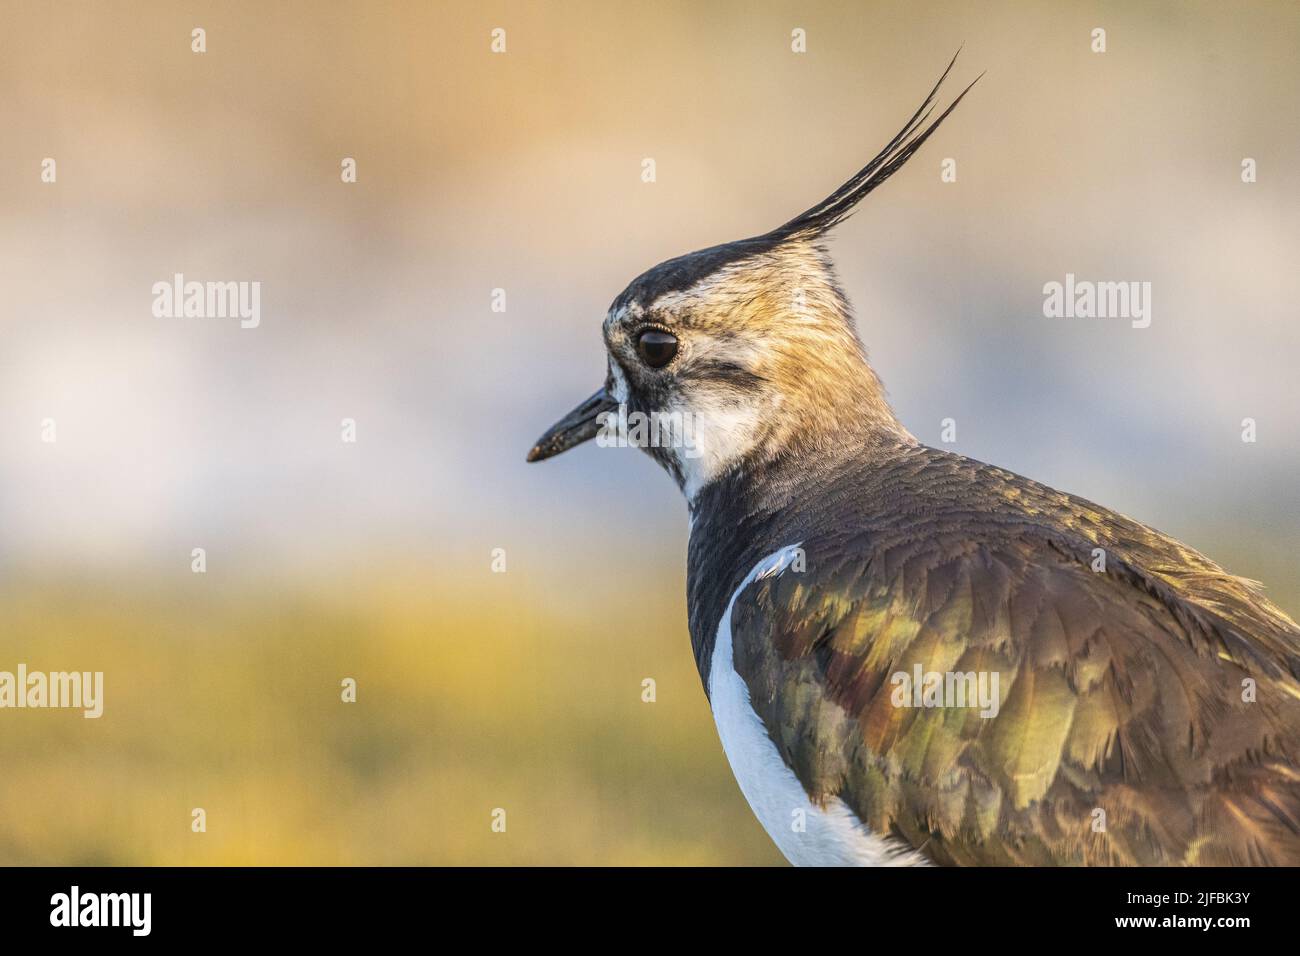 France, Somme, Baie de Somme, Cayeux-sur-mer, Ault, Le Hâble d'Ault, in spring the Northern Lapwing (Vanellus vanellus) feeds and nests in the gravelly lawns of the hâble dotted with pebbles Stock Photo